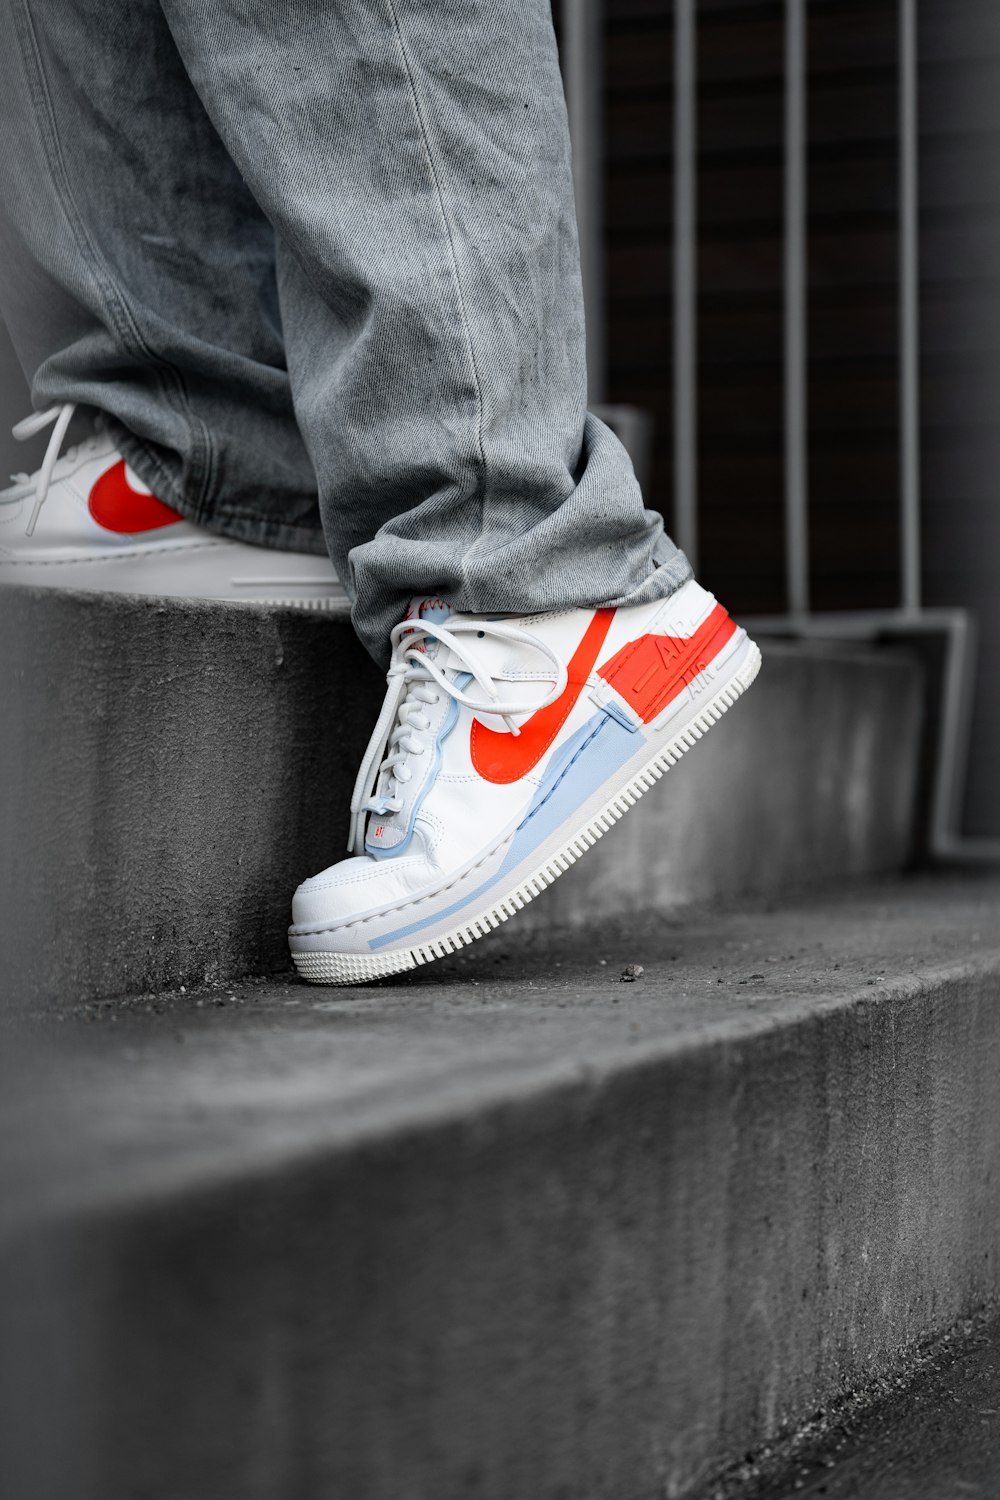 person in blue denim jeans wearing white and red nike sneakers